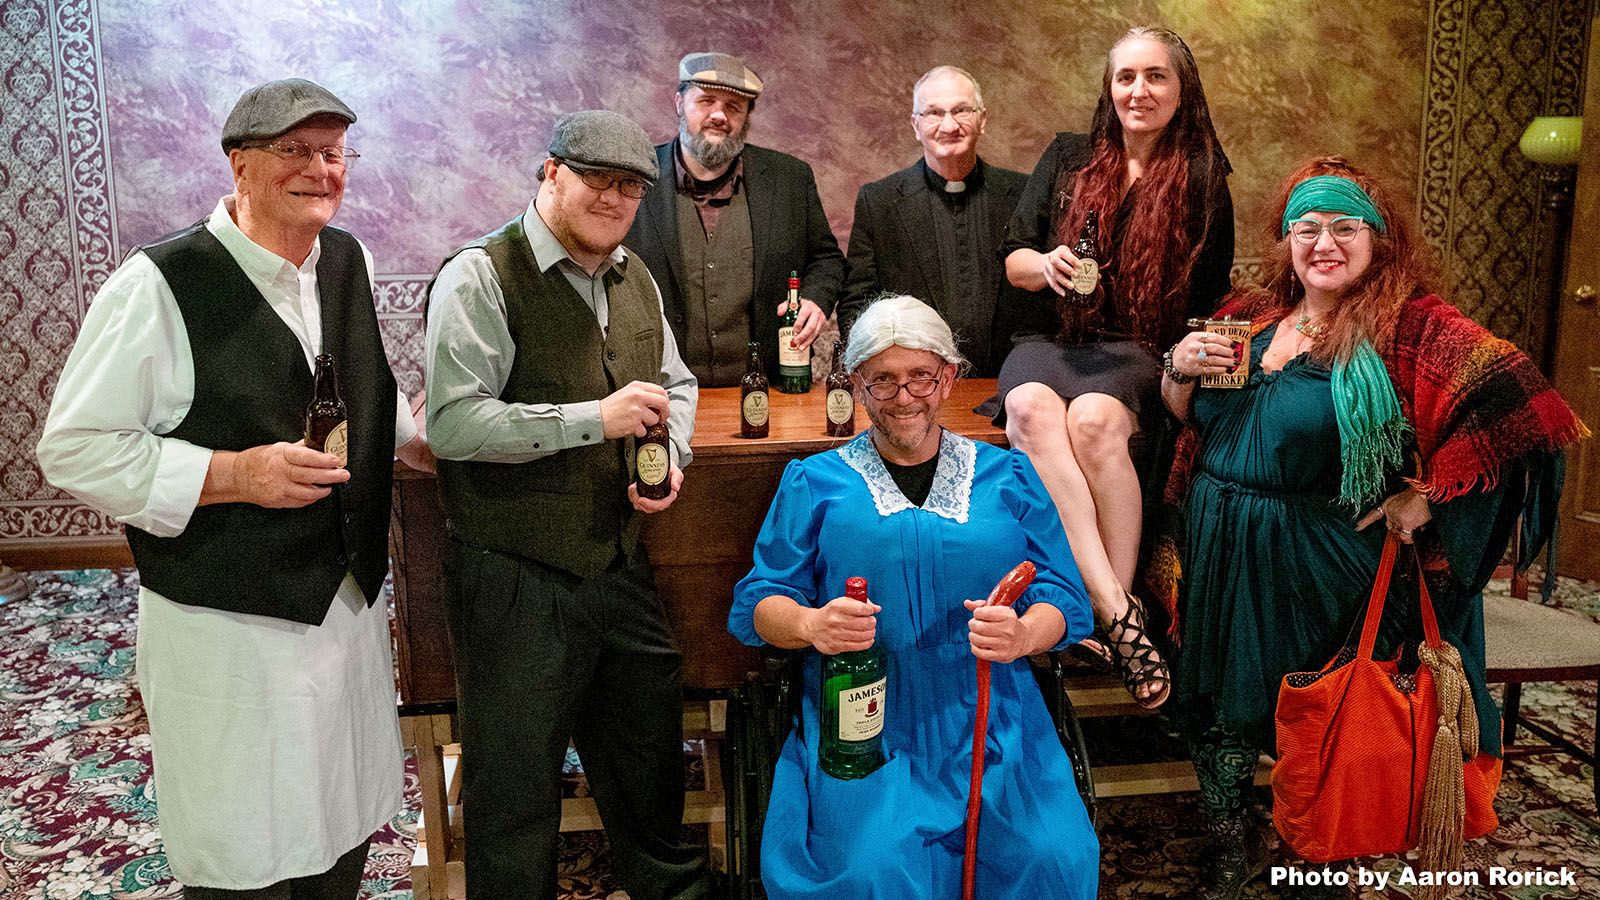 This year’s cast of Flanagan’s Wake includes, standing from left, David Hill, Colton Easterday, Shawn McCarthy, Scott McMeen, Ruth Fearnow, Teresa Rust, and Chuck Fenwick, seated. Not pictured: Peter Klopfenstein.